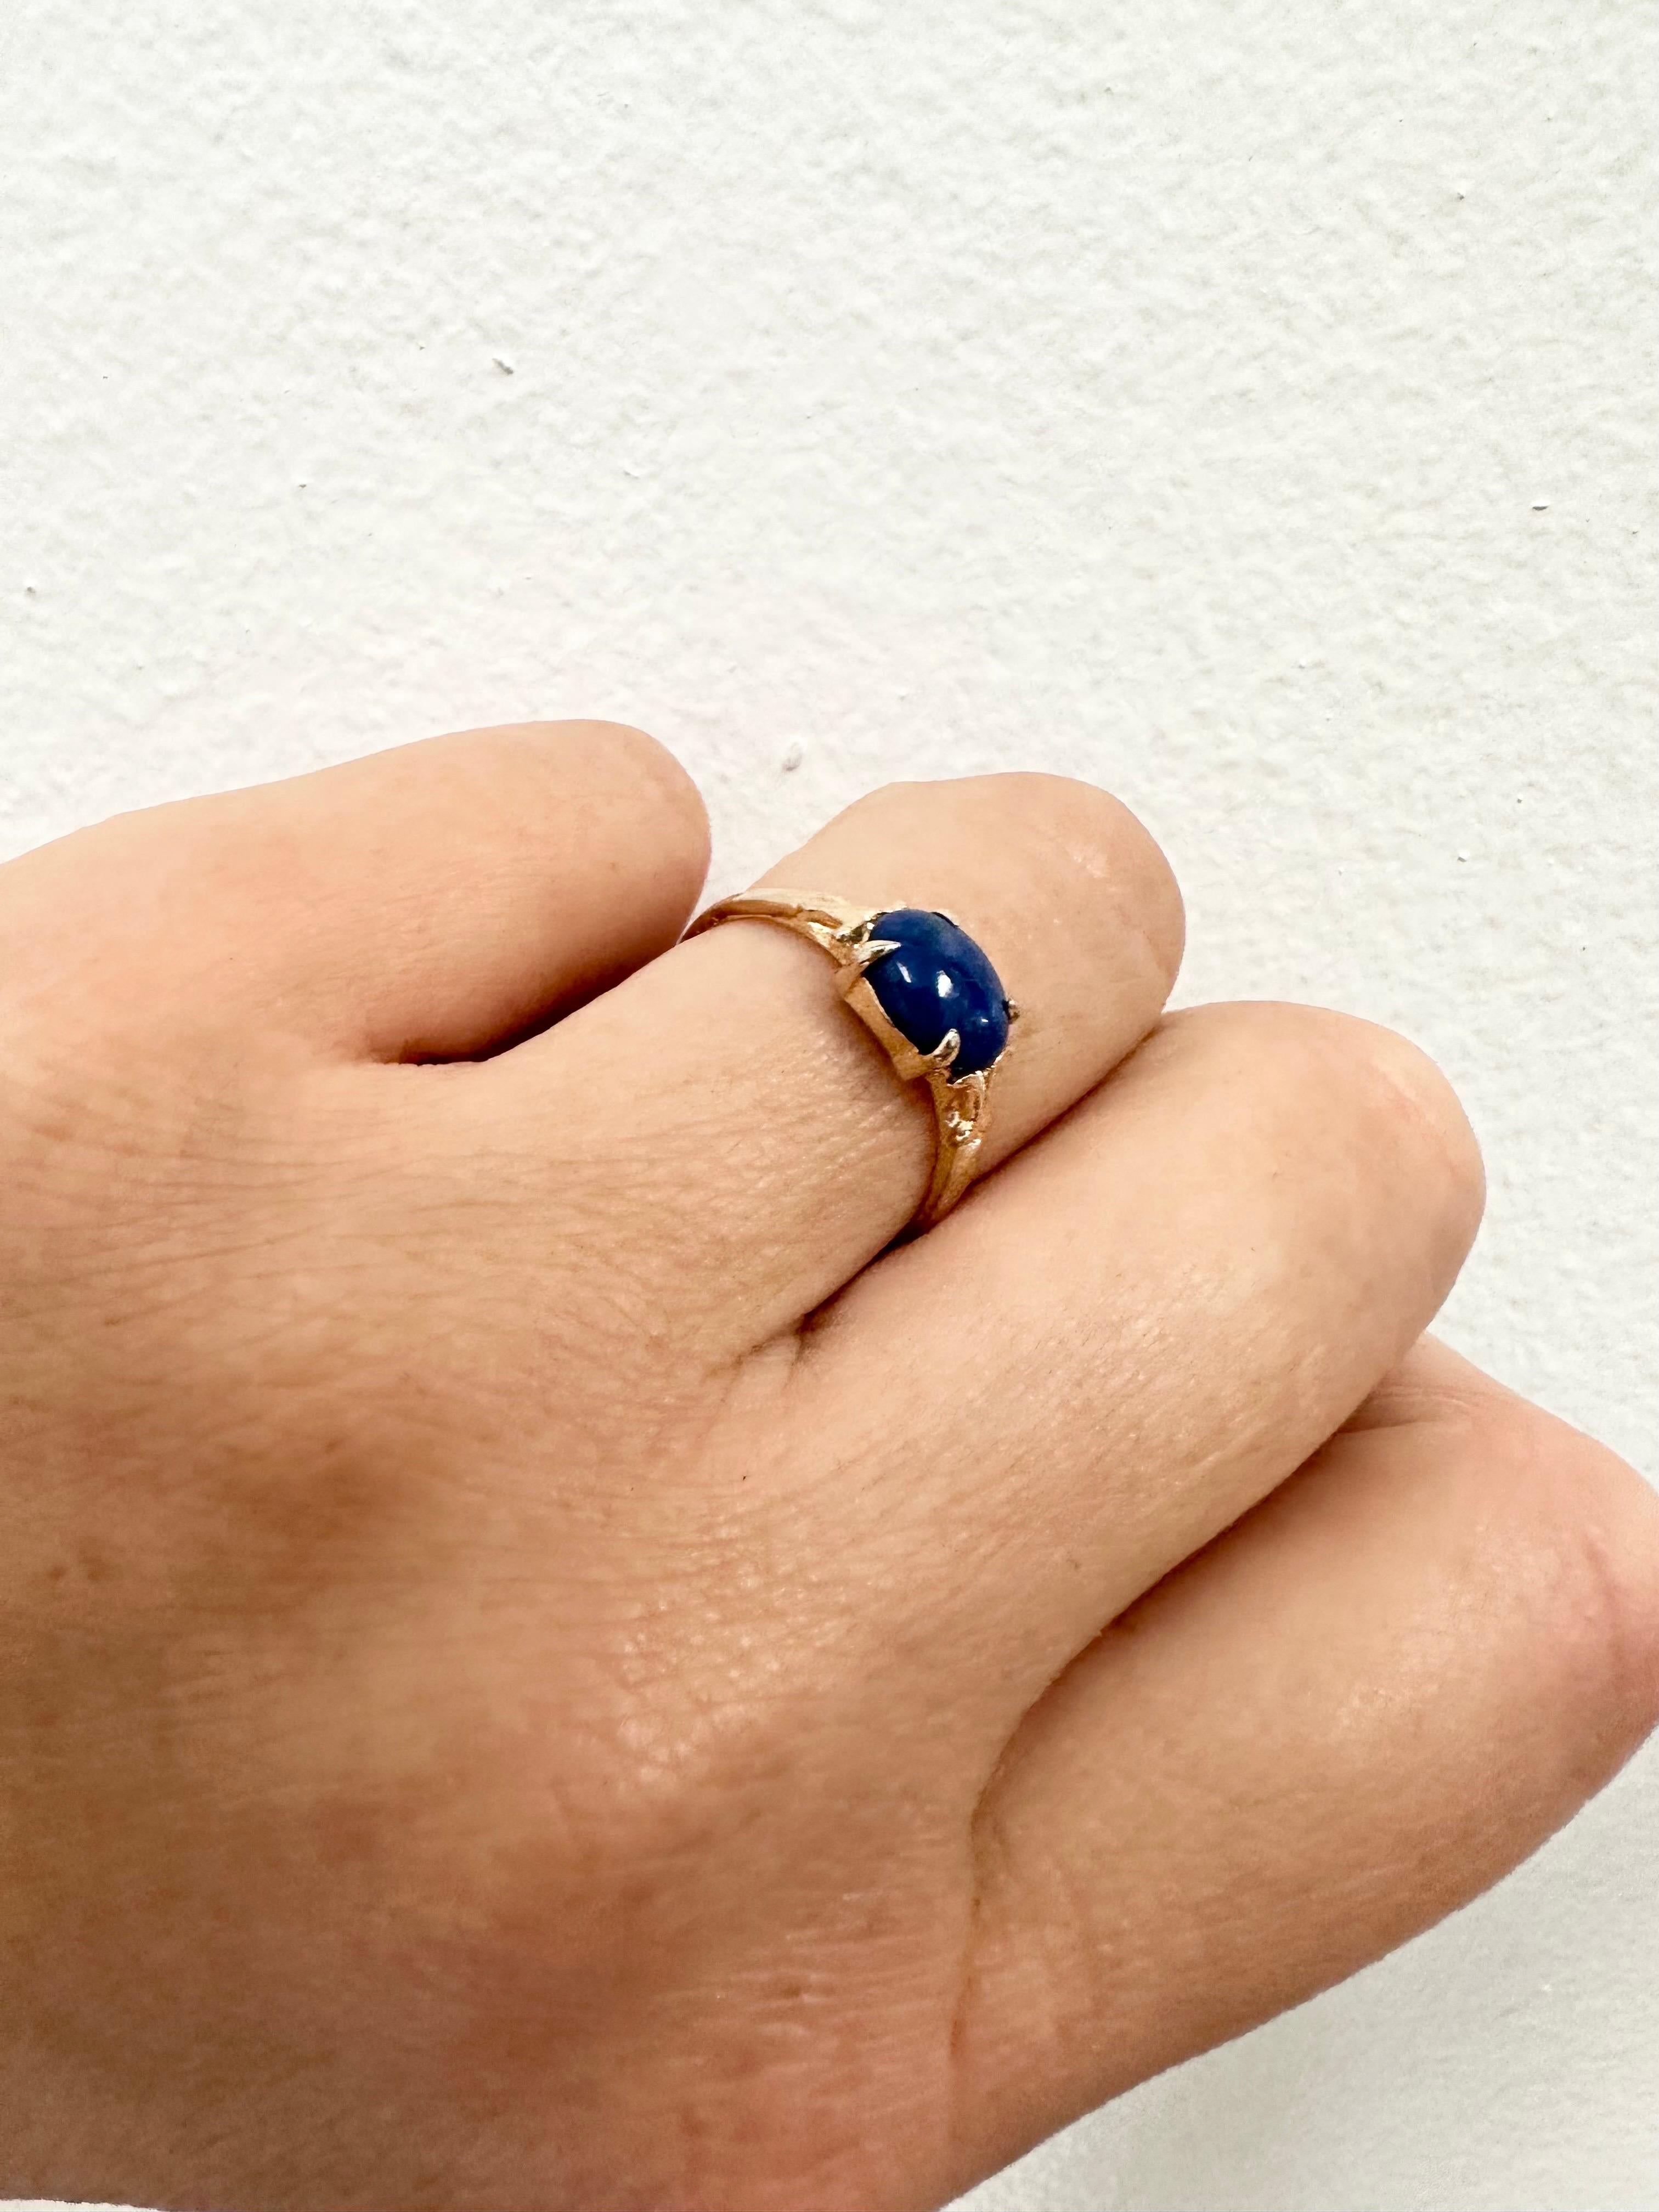 Vintage Lapis Lazuli ring in 14KT yellow gold. Excellent condition! Size 7.5 Can be re-sized!
Certificate of authenticity comes with purchase!

ABOUT US
We are a family-owned business. Our studio in located in the heart of Boca Raton at the